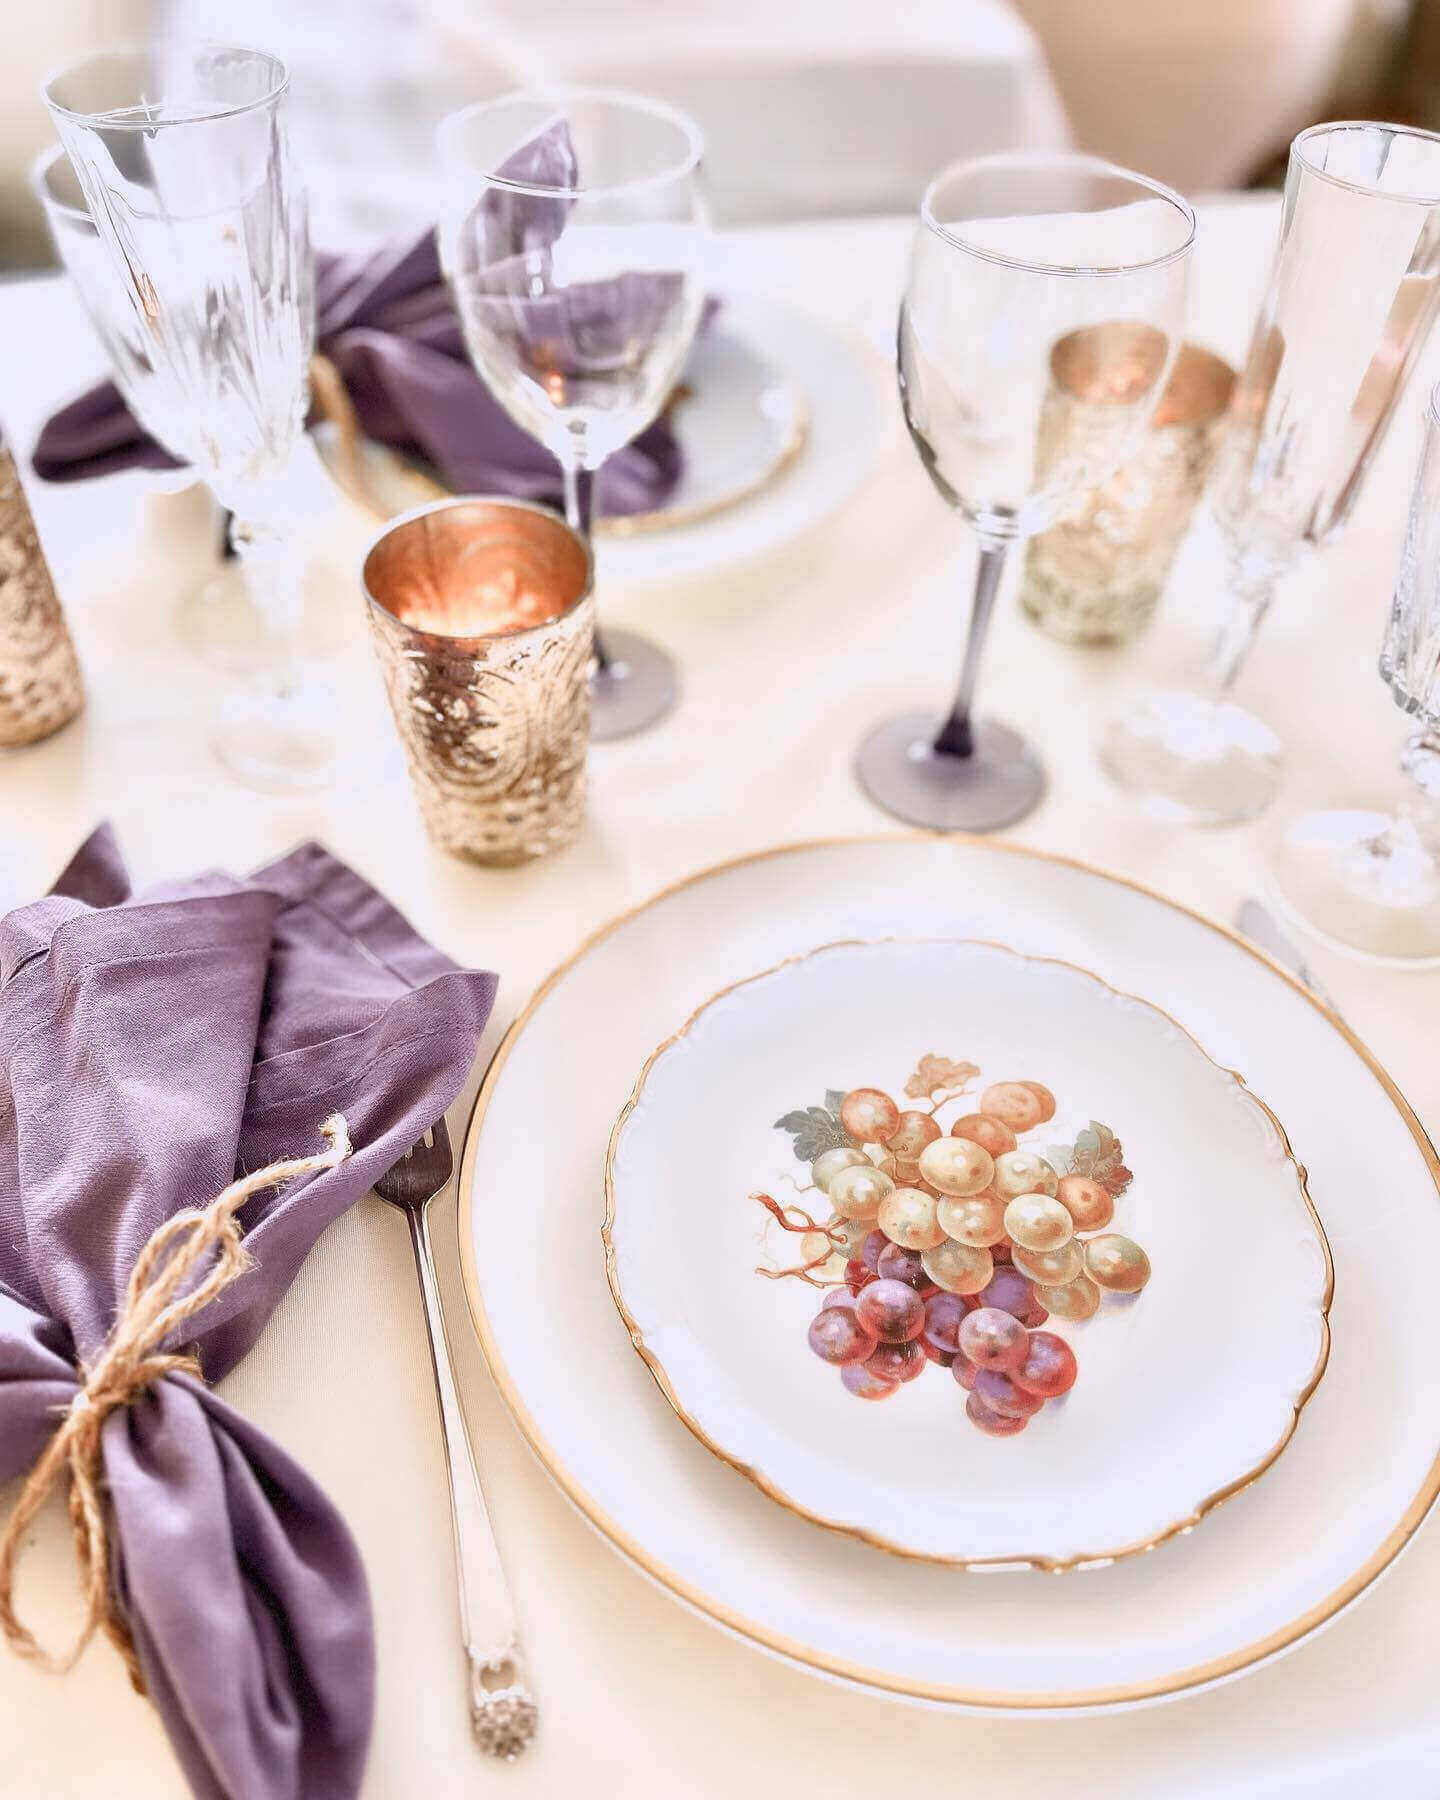 Autumn harvest plates and purple napkins, clear glassware and pewter goblets